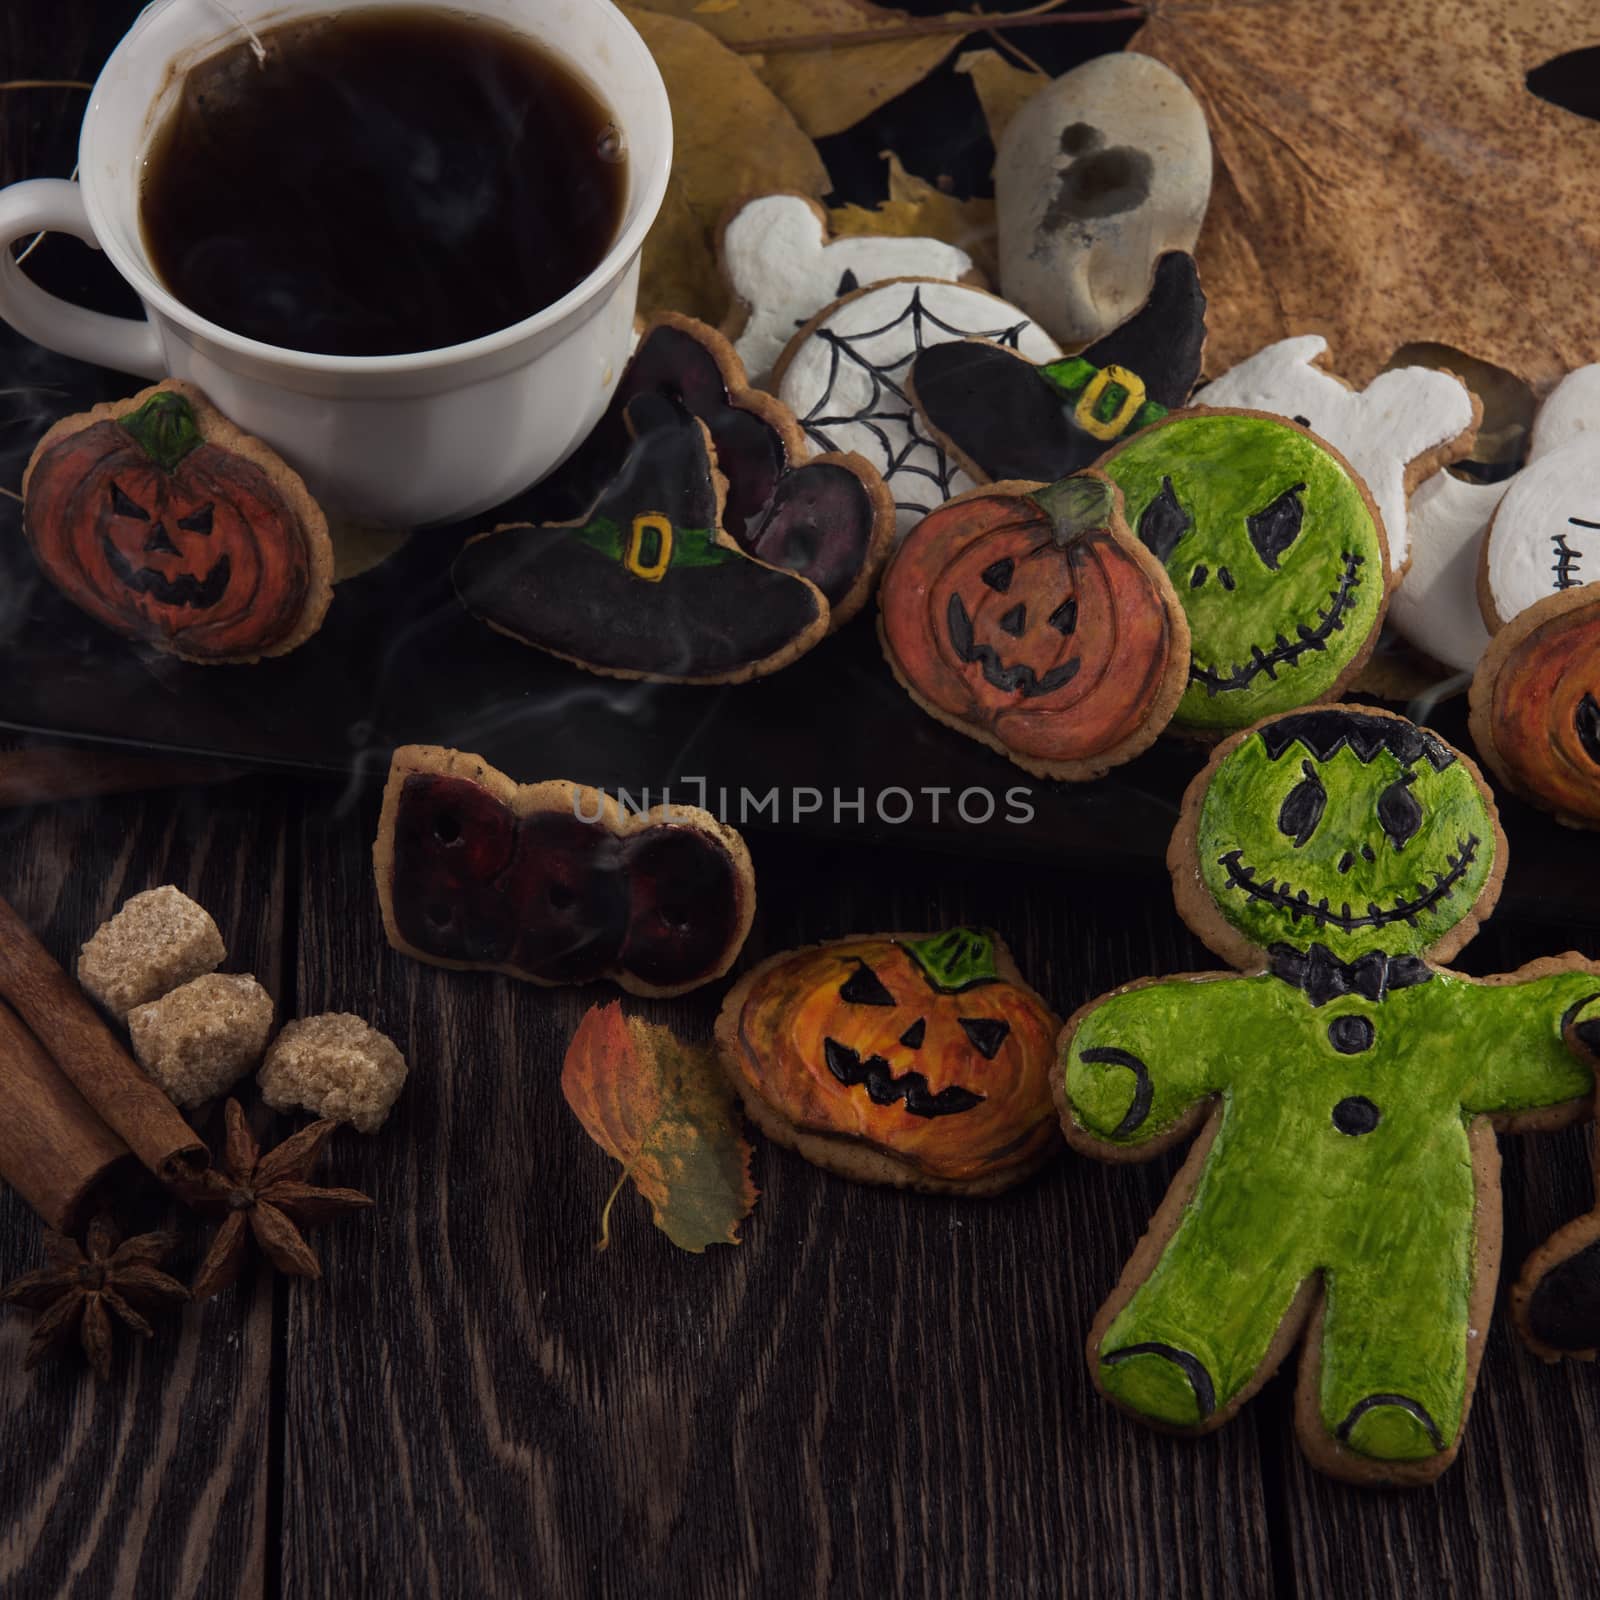 Homemade delicious ginger biscuits for Halloween by rusak